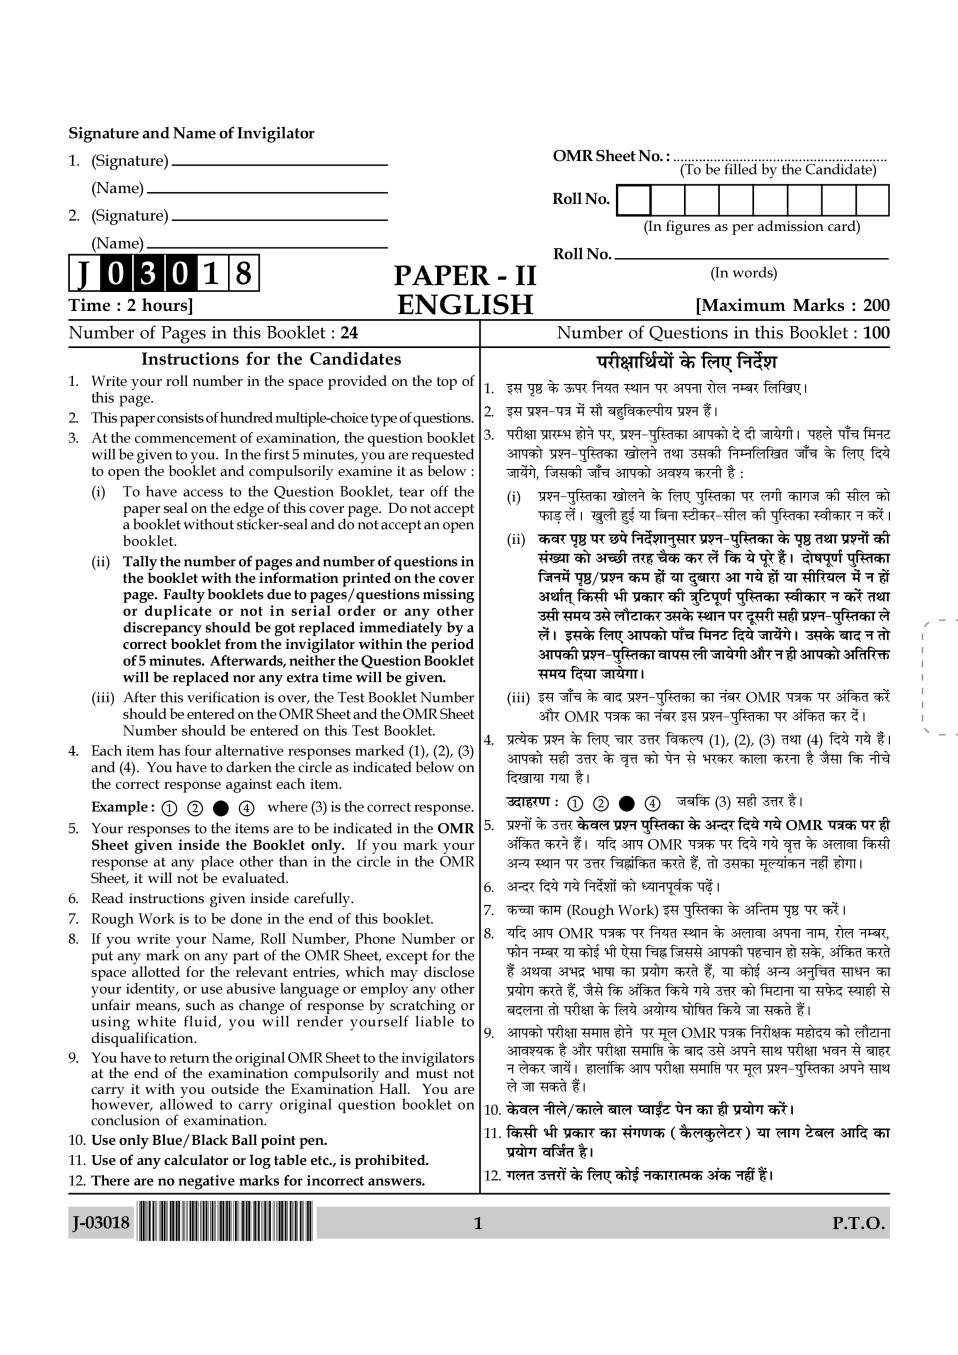 UGC NET English Question Paper 2018 - Page 1